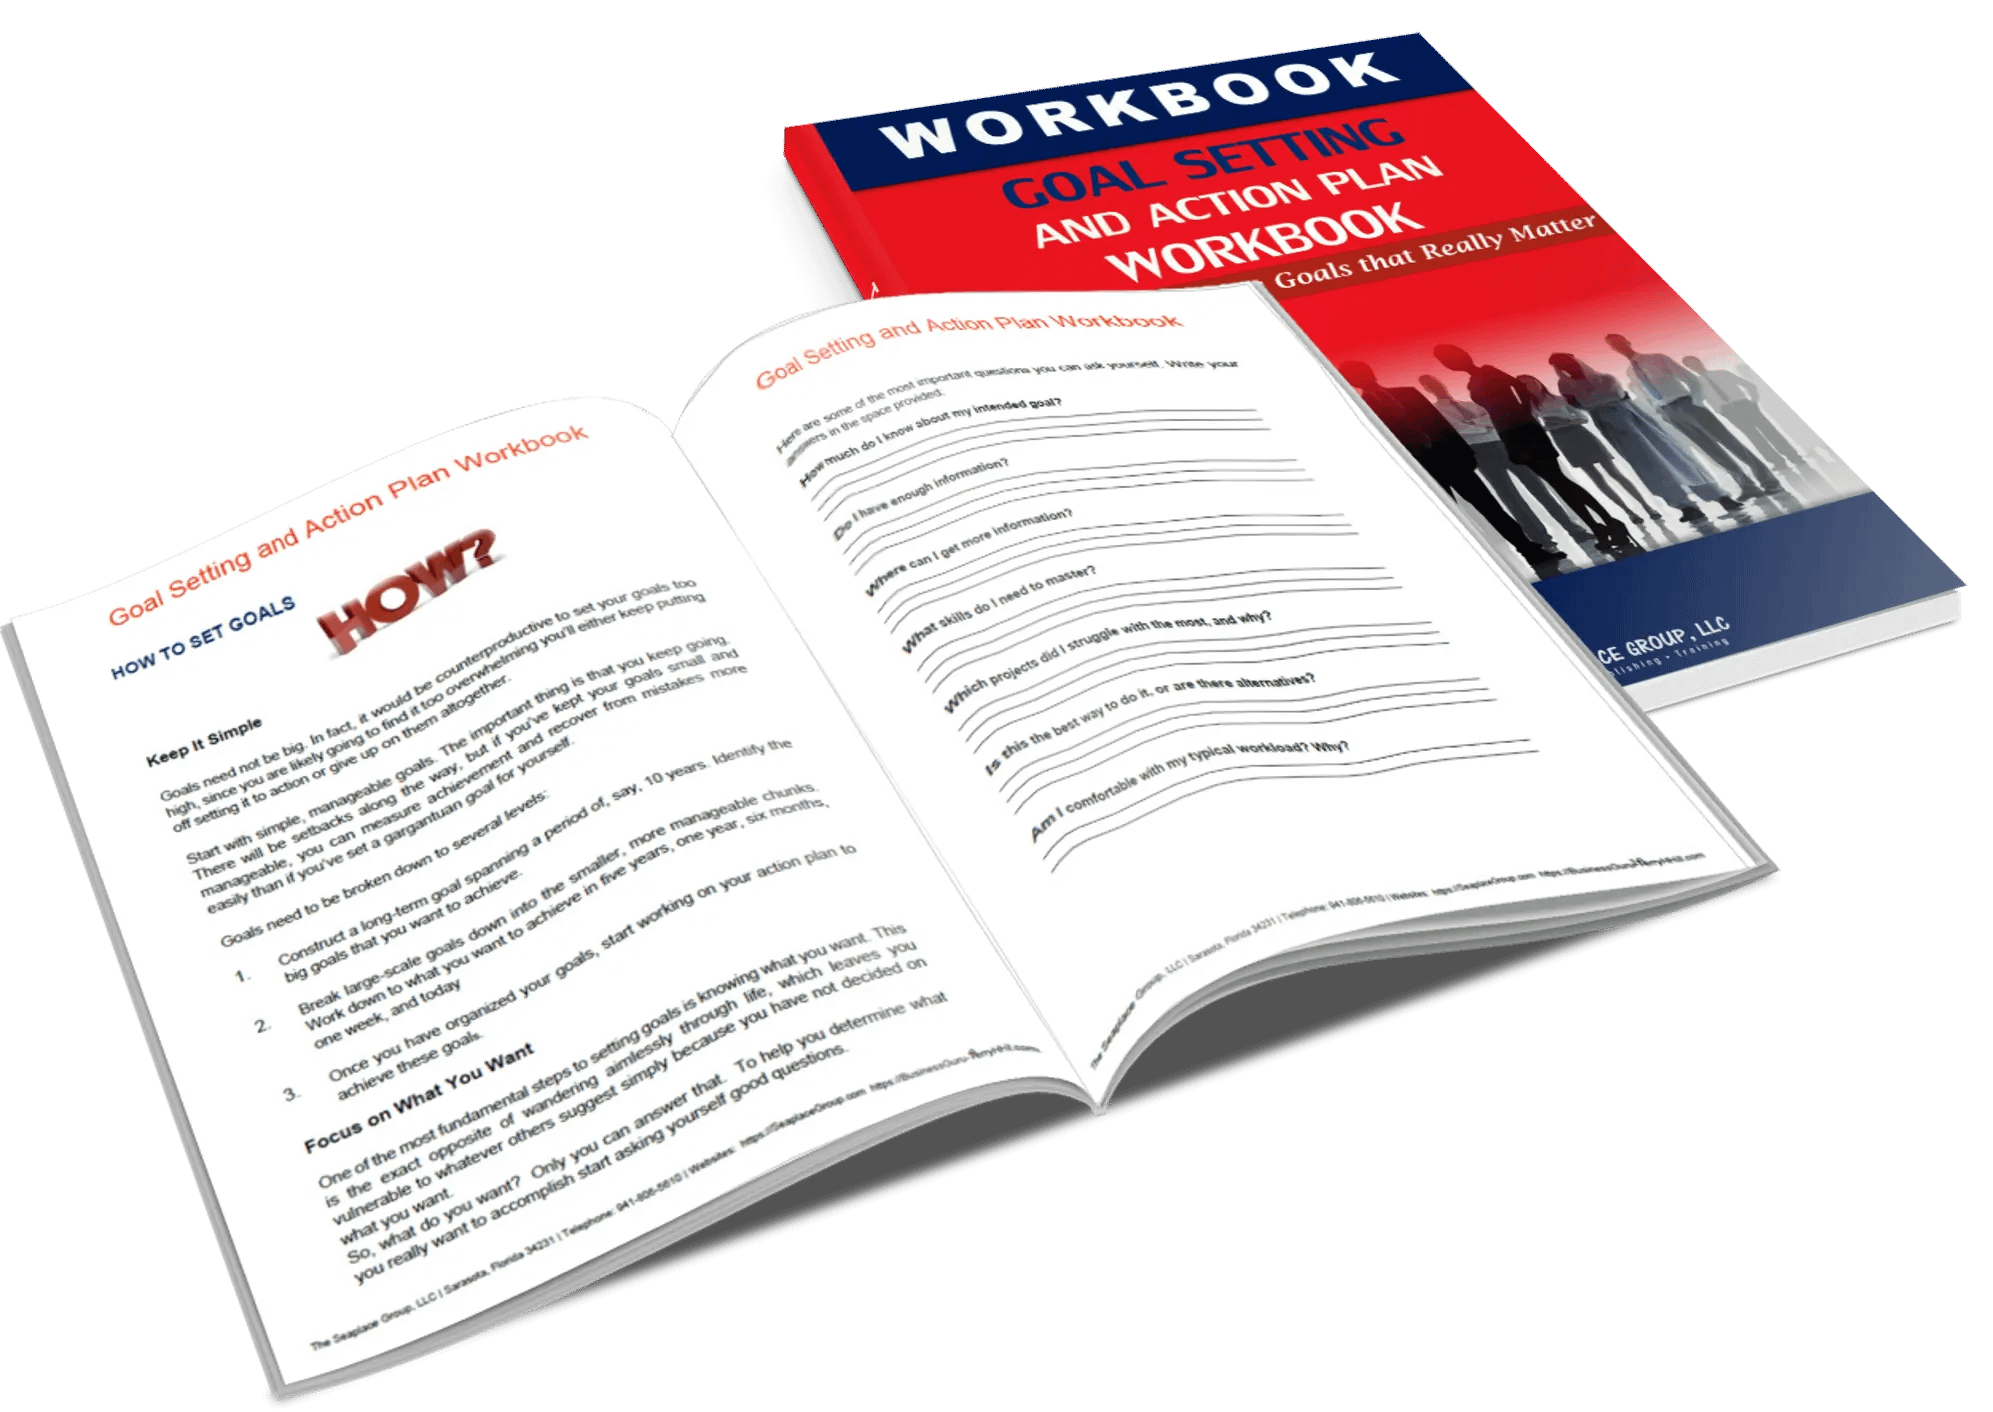 The Goal Setting and Action Plan Interactive Workbook summarizes the most effective methods and techniques for goal-setting and action planning.